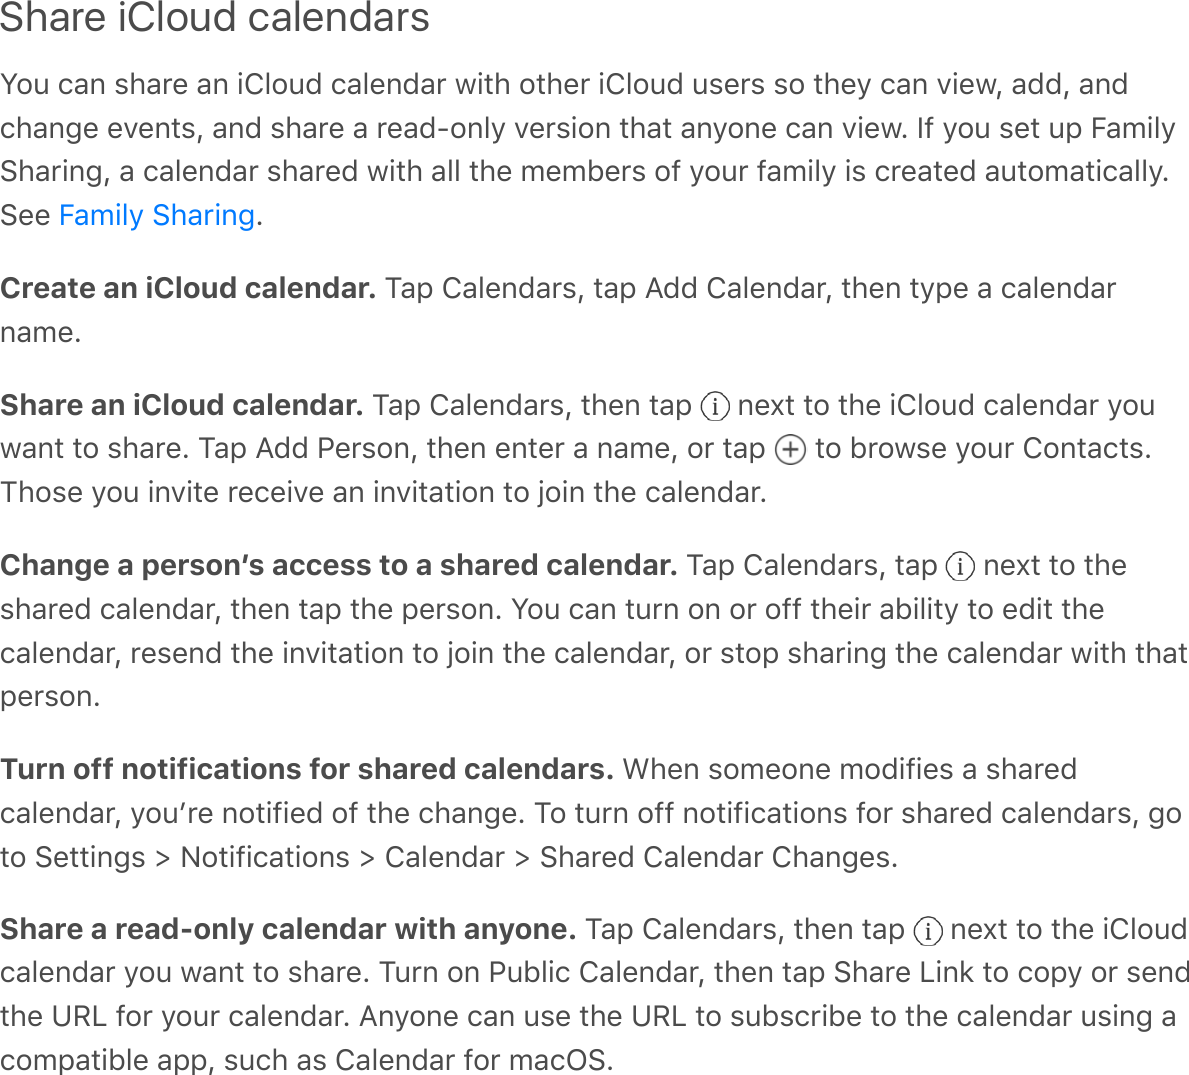 Share iCloud calendarsN&quot;0&amp;9-#&amp;)1-,.&amp;-#&amp;(O?&quot;0&lt;&amp;9-?.#&lt;-,&amp;H(%1&amp;&quot;%1.,&amp;(O?&quot;0&lt;&amp;0).,)&amp;)&quot;&amp;%1./&amp;9-#&amp;:(.HL&amp;-&lt;&lt;L&amp;-#&lt;91-#5.&amp;.:.#%)L&amp;-#&lt;&amp;)1-,.&amp;-&amp;,.-&lt;T&quot;#?/&amp;:.,)(&quot;#&amp;%1-%&amp;-#/&quot;#.&amp;9-#&amp;:(.HA&amp;Q8&amp;/&quot;0&amp;).%&amp;06&amp;+-&apos;(?/E1-,(#5L&amp;-&amp;9-?.#&lt;-,&amp;)1-,.&lt;&amp;H(%1&amp;-??&amp;%1.&amp;&apos;.&apos;@.,)&amp;&quot;8&amp;/&quot;0,&amp;8-&apos;(?/&amp;()&amp;9,.-%.&lt;&amp;-0%&quot;&apos;-%(9-??/AE..&amp; ACreate an iCloud calendar. 2-6&amp;O-?.#&lt;-,)L&amp;%-6&amp;;&lt;&lt;&amp;O-?.#&lt;-,L&amp;%1.#&amp;%/6.&amp;-&amp;9-?.#&lt;-,#-&apos;.AShare an iCloud calendar. 2-6&amp;O-?.#&lt;-,)L&amp;%1.#&amp;%-6&amp; &amp;#.`%&amp;%&quot;&amp;%1.&amp;(O?&quot;0&lt;&amp;9-?.#&lt;-,&amp;/&quot;0H-#%&amp;%&quot;&amp;)1-,.A&amp;2-6&amp;;&lt;&lt;&amp;7.,)&quot;#L&amp;%1.#&amp;.#%.,&amp;-&amp;#-&apos;.L&amp;&quot;,&amp;%-6&amp; &amp;%&quot;&amp;@,&quot;H).&amp;/&quot;0,&amp;O&quot;#%-9%)A21&quot;).&amp;/&quot;0&amp;(#:(%.&amp;,.9.(:.&amp;-#&amp;(#:(%-%(&quot;#&amp;%&quot;&amp;[&quot;(#&amp;%1.&amp;9-?.#&lt;-,AChange a personʼs access to a shared calendar. 2-6&amp;O-?.#&lt;-,)L&amp;%-6&amp; &amp;#.`%&amp;%&quot;&amp;%1.)1-,.&lt;&amp;9-?.#&lt;-,L&amp;%1.#&amp;%-6&amp;%1.&amp;6.,)&quot;#A&amp;N&quot;0&amp;9-#&amp;%0,#&amp;&quot;#&amp;&quot;,&amp;&quot;88&amp;%1.(,&amp;-@(?(%/&amp;%&quot;&amp;.&lt;(%&amp;%1.9-?.#&lt;-,L&amp;,.).#&lt;&amp;%1.&amp;(#:(%-%(&quot;#&amp;%&quot;&amp;[&quot;(#&amp;%1.&amp;9-?.#&lt;-,L&amp;&quot;,&amp;)%&quot;6&amp;)1-,(#5&amp;%1.&amp;9-?.#&lt;-,&amp;H(%1&amp;%1-%6.,)&quot;#ATurn off notifications for shared calendars. F1.#&amp;)&quot;&apos;.&quot;#.&amp;&apos;&quot;&lt;(8(.)&amp;-&amp;)1-,.&lt;9-?.#&lt;-,L&amp;/&quot;0$,.&amp;#&quot;%(8(.&lt;&amp;&quot;8&amp;%1.&amp;91-#5.A&amp;2&quot;&amp;%0,#&amp;&quot;88&amp;#&quot;%(8(9-%(&quot;#)&amp;8&quot;,&amp;)1-,.&lt;&amp;9-?.#&lt;-,)L&amp;5&quot;%&quot;&amp;E.%%(#5)&amp;d&amp;&gt;&quot;%(8(9-%(&quot;#)&amp;d&amp;O-?.#&lt;-,&amp;d&amp;E1-,.&lt;&amp;O-?.#&lt;-,&amp;O1-#5.)AShare a read-only calendar with anyone. 2-6&amp;O-?.#&lt;-,)L&amp;%1.#&amp;%-6&amp; &amp;#.`%&amp;%&quot;&amp;%1.&amp;(O?&quot;0&lt;9-?.#&lt;-,&amp;/&quot;0&amp;H-#%&amp;%&quot;&amp;)1-,.A&amp;20,#&amp;&quot;#&amp;70@?(9&amp;O-?.#&lt;-,L&amp;%1.#&amp;%-6&amp;E1-,.&amp;=(#3&amp;%&quot;&amp;9&quot;6/&amp;&quot;,&amp;).#&lt;%1.&amp;\C=&amp;8&quot;,&amp;/&quot;0,&amp;9-?.#&lt;-,A&amp;;#/&quot;#.&amp;9-#&amp;0).&amp;%1.&amp;\C=&amp;%&quot;&amp;)0@)9,(@.&amp;%&quot;&amp;%1.&amp;9-?.#&lt;-,&amp;0)(#5&amp;-9&quot;&apos;6-%(@?.&amp;-66L&amp;)091&amp;-)&amp;O-?.#&lt;-,&amp;8&quot;,&amp;&apos;-9IEA+-&apos;(?/&amp;E1-,(#5